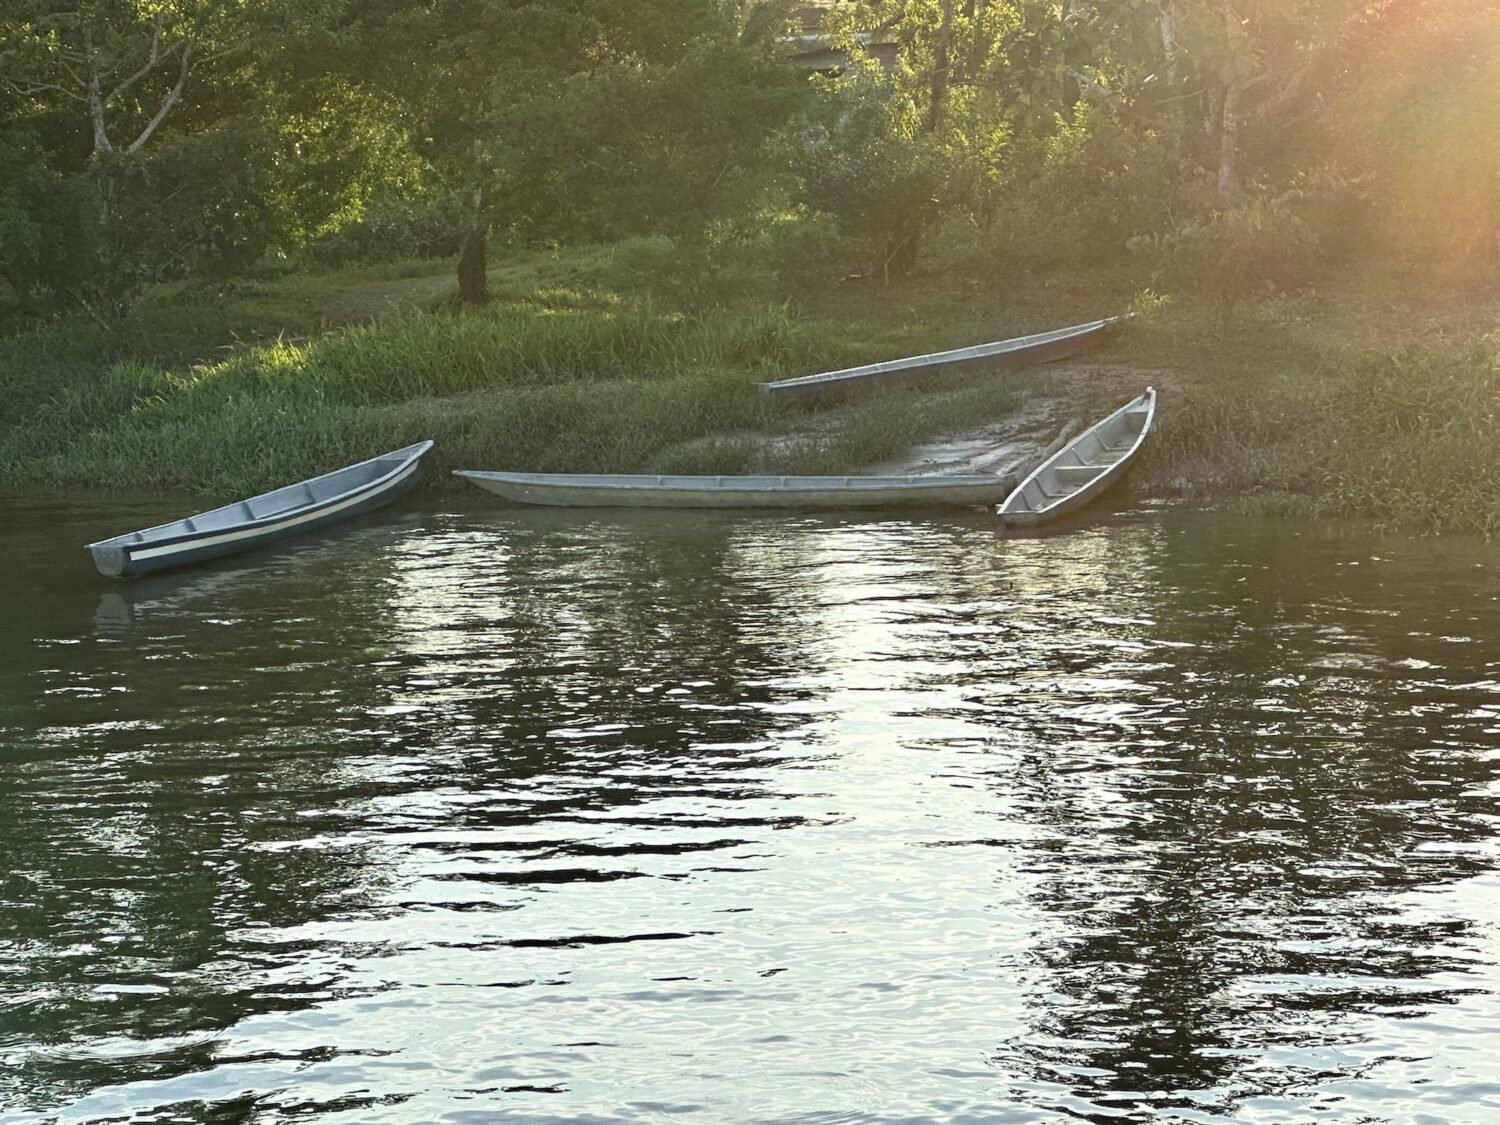 Canoes on the banks of a body of water in the Amazon rainforest.